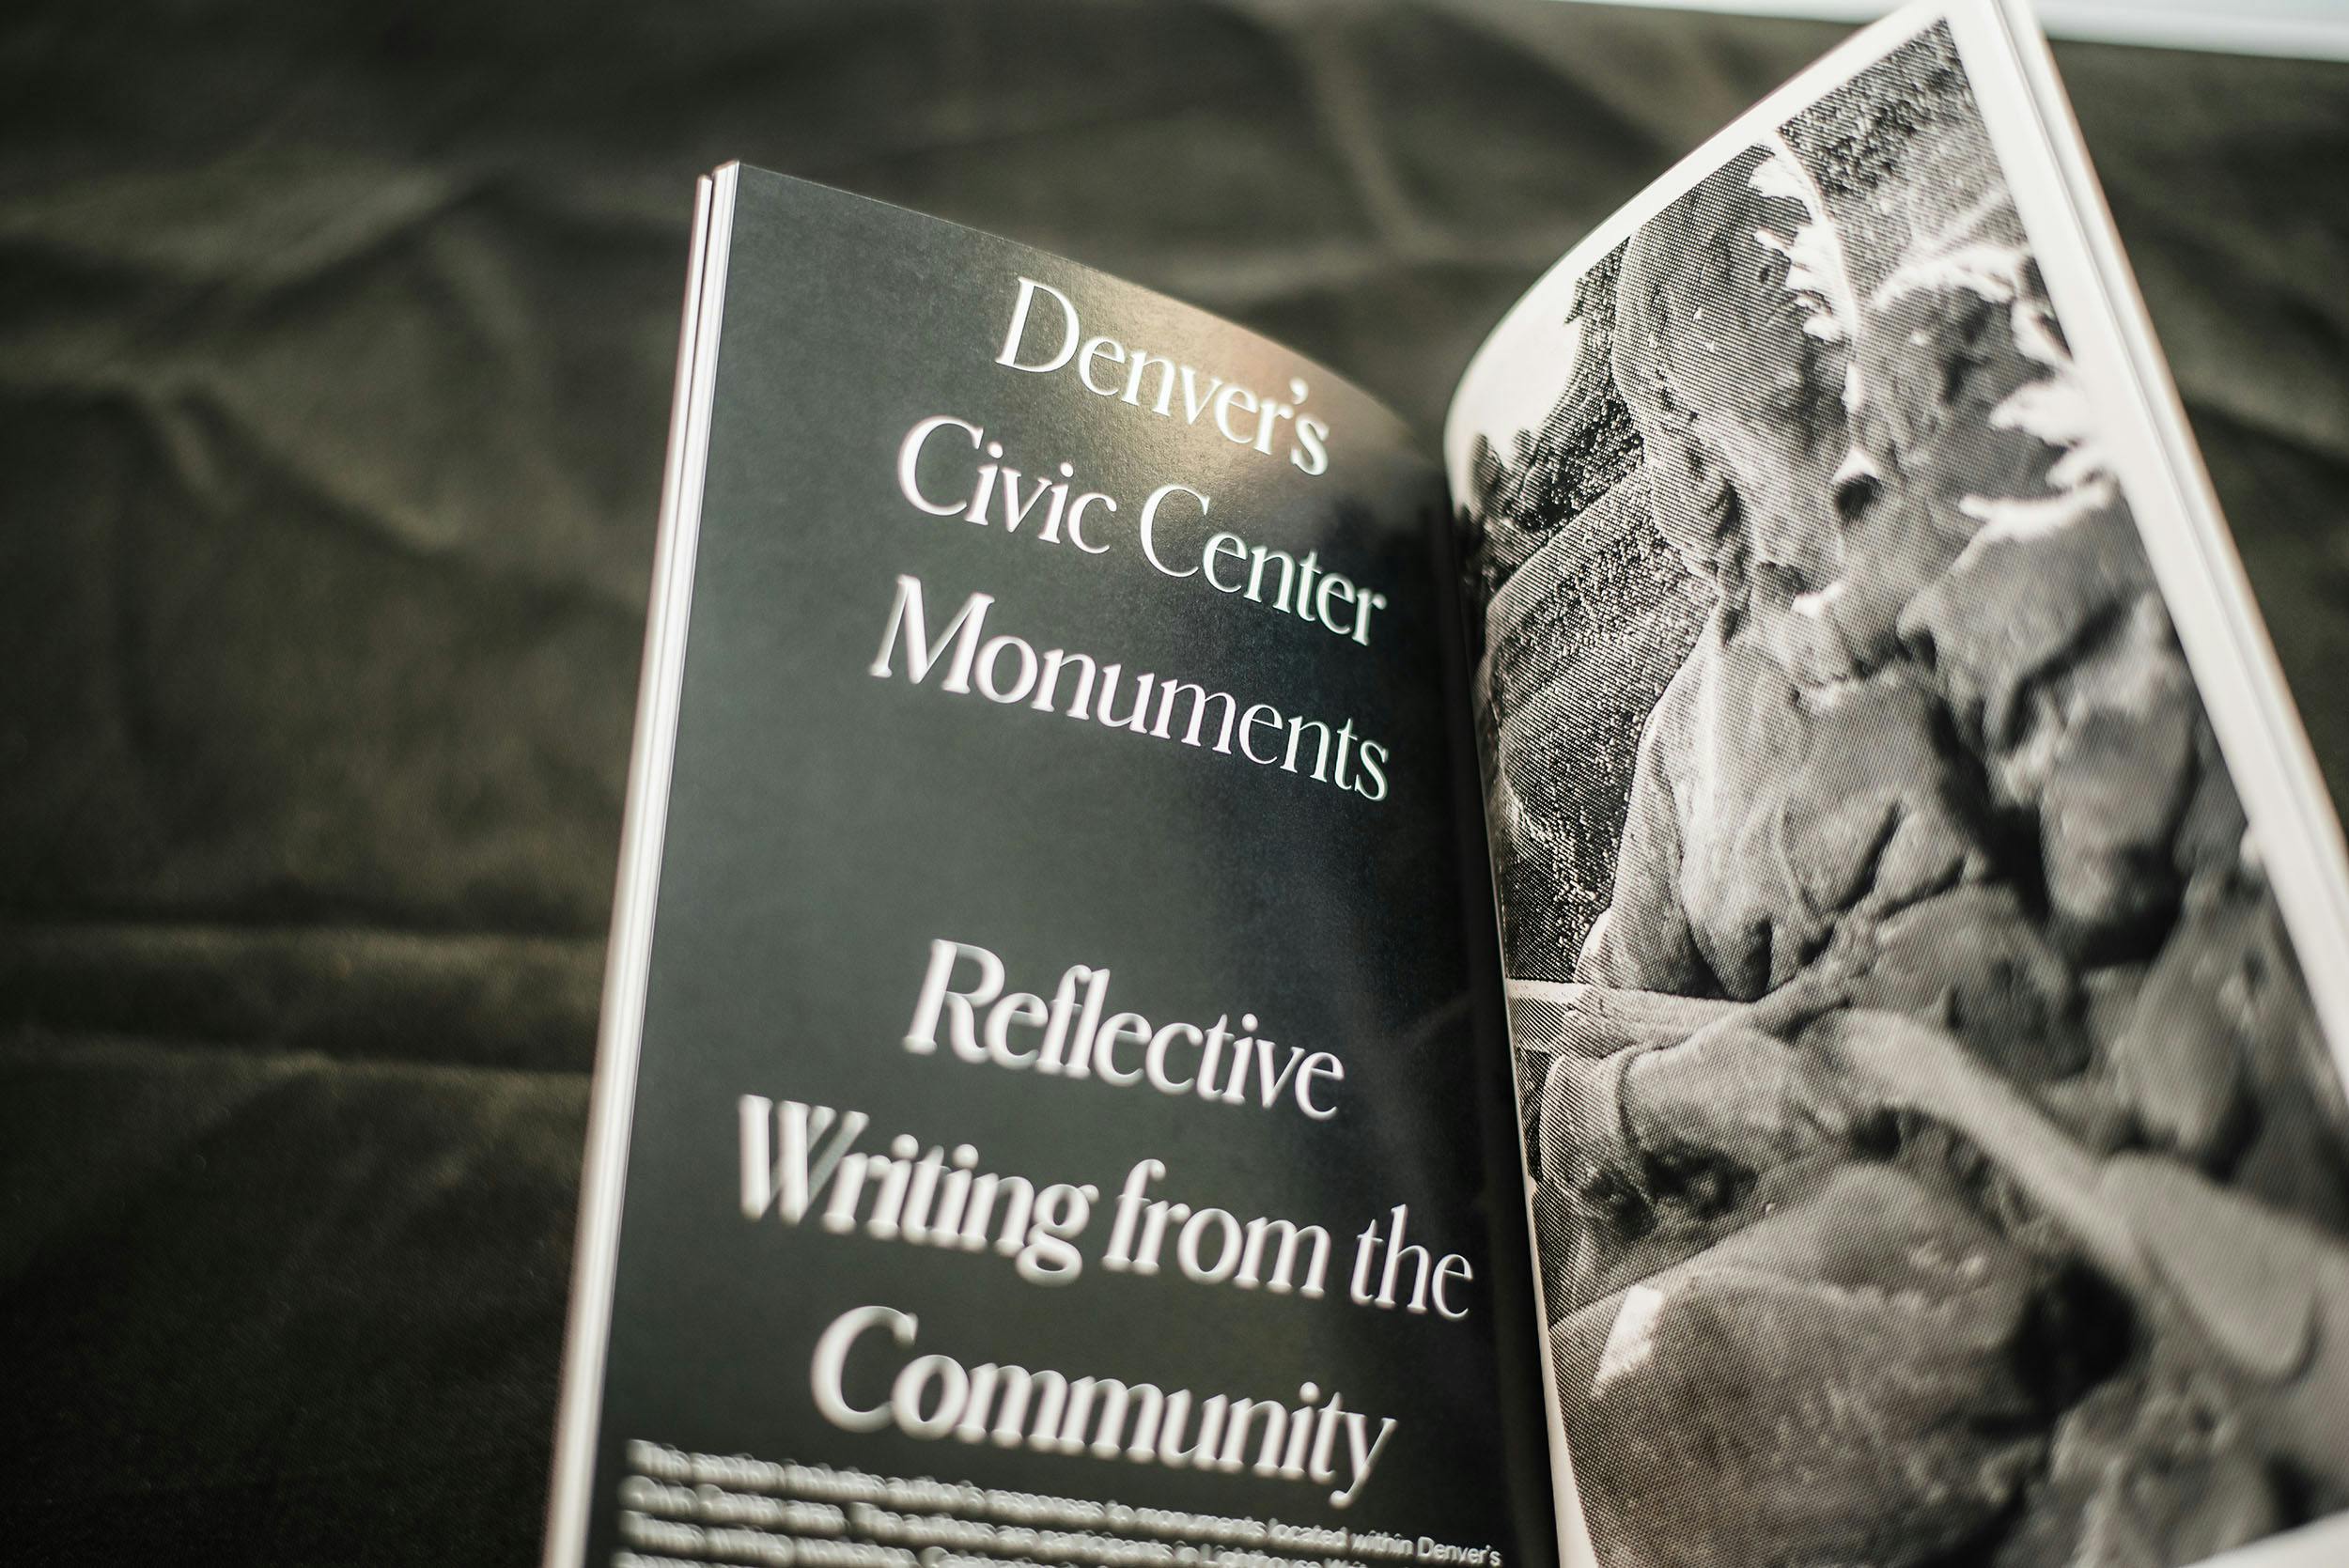 The MONUMENTAL zine featuring contributions from local artists and writers in Denver. Photo by From the Hip Photo.